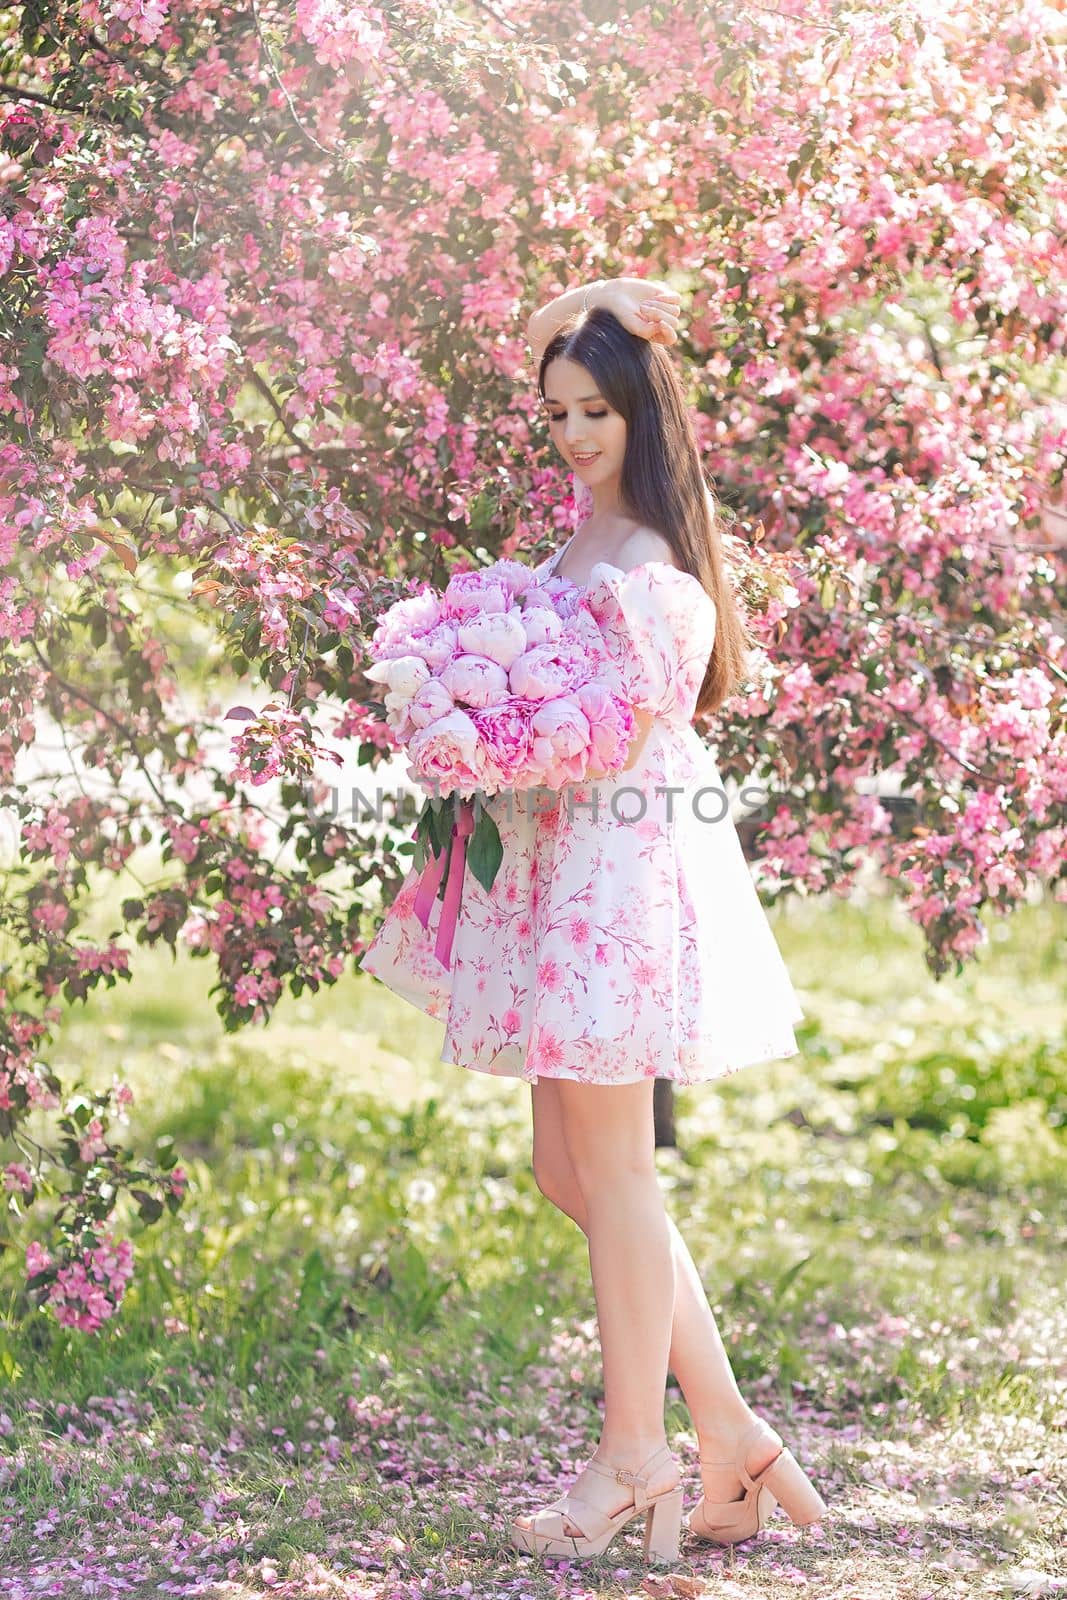 A brunette in a light dress, with a large bouquet of peonies, stands near pink blooming apple trees by Zakharova